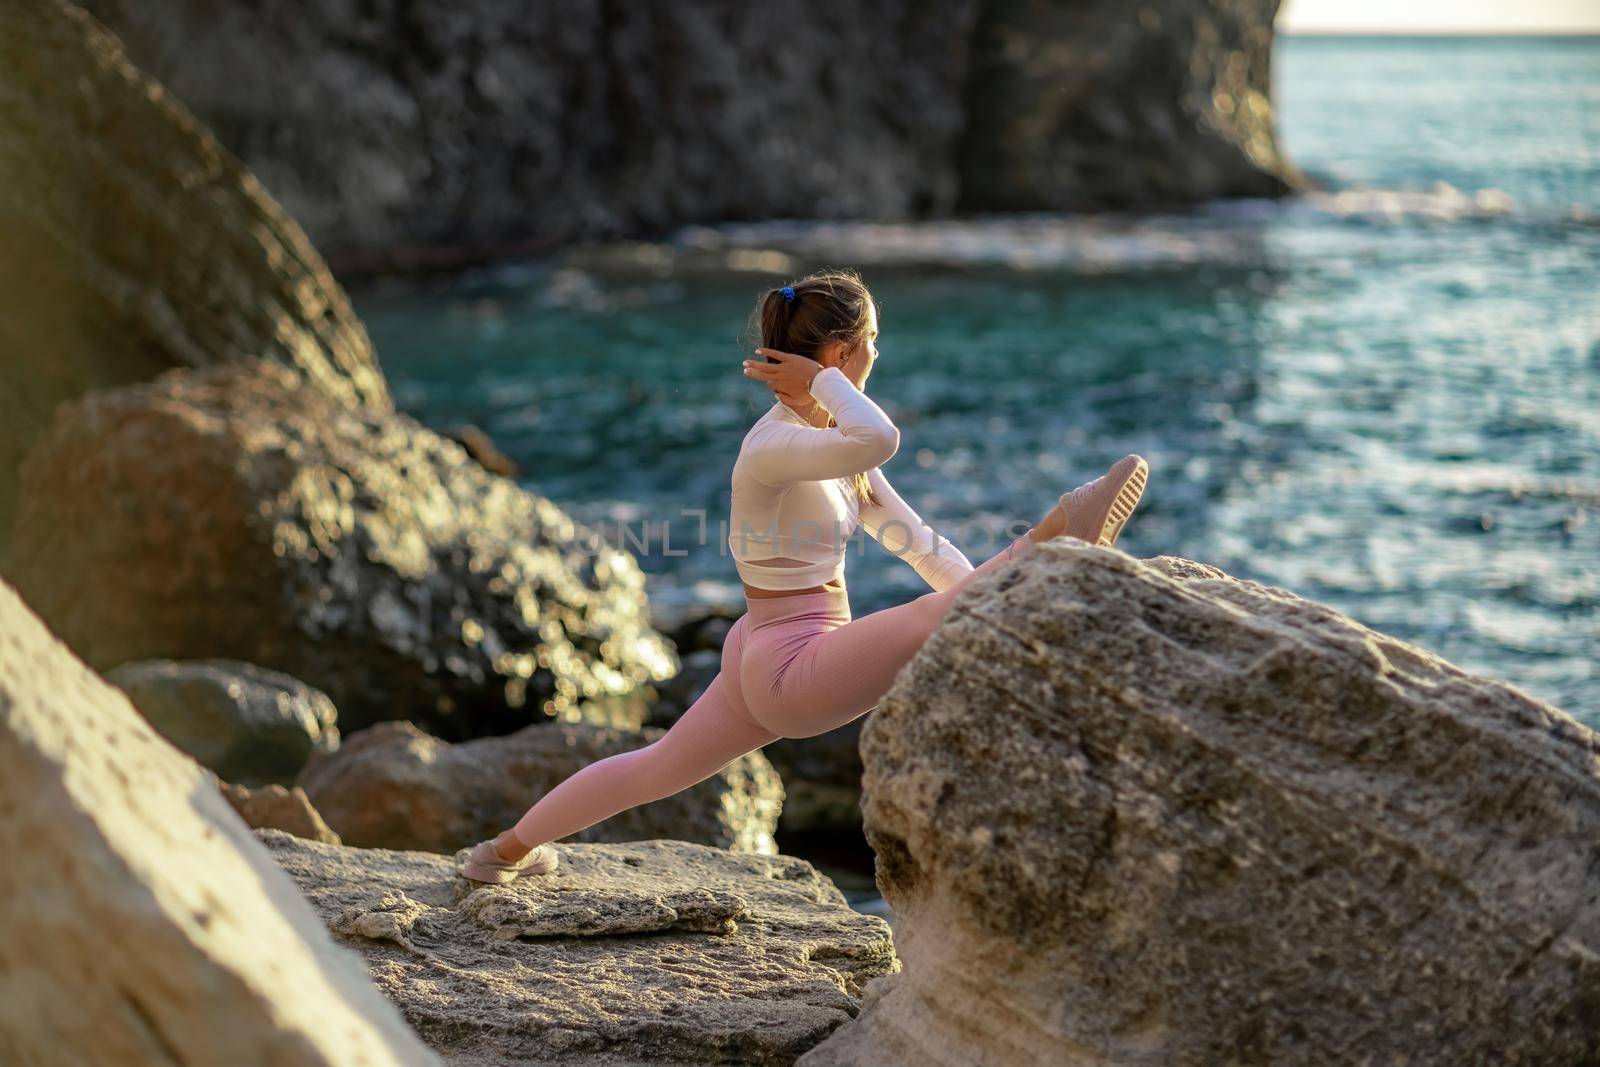 Girl gymnast is training on the beach by the sea. Does twine. Photo series.